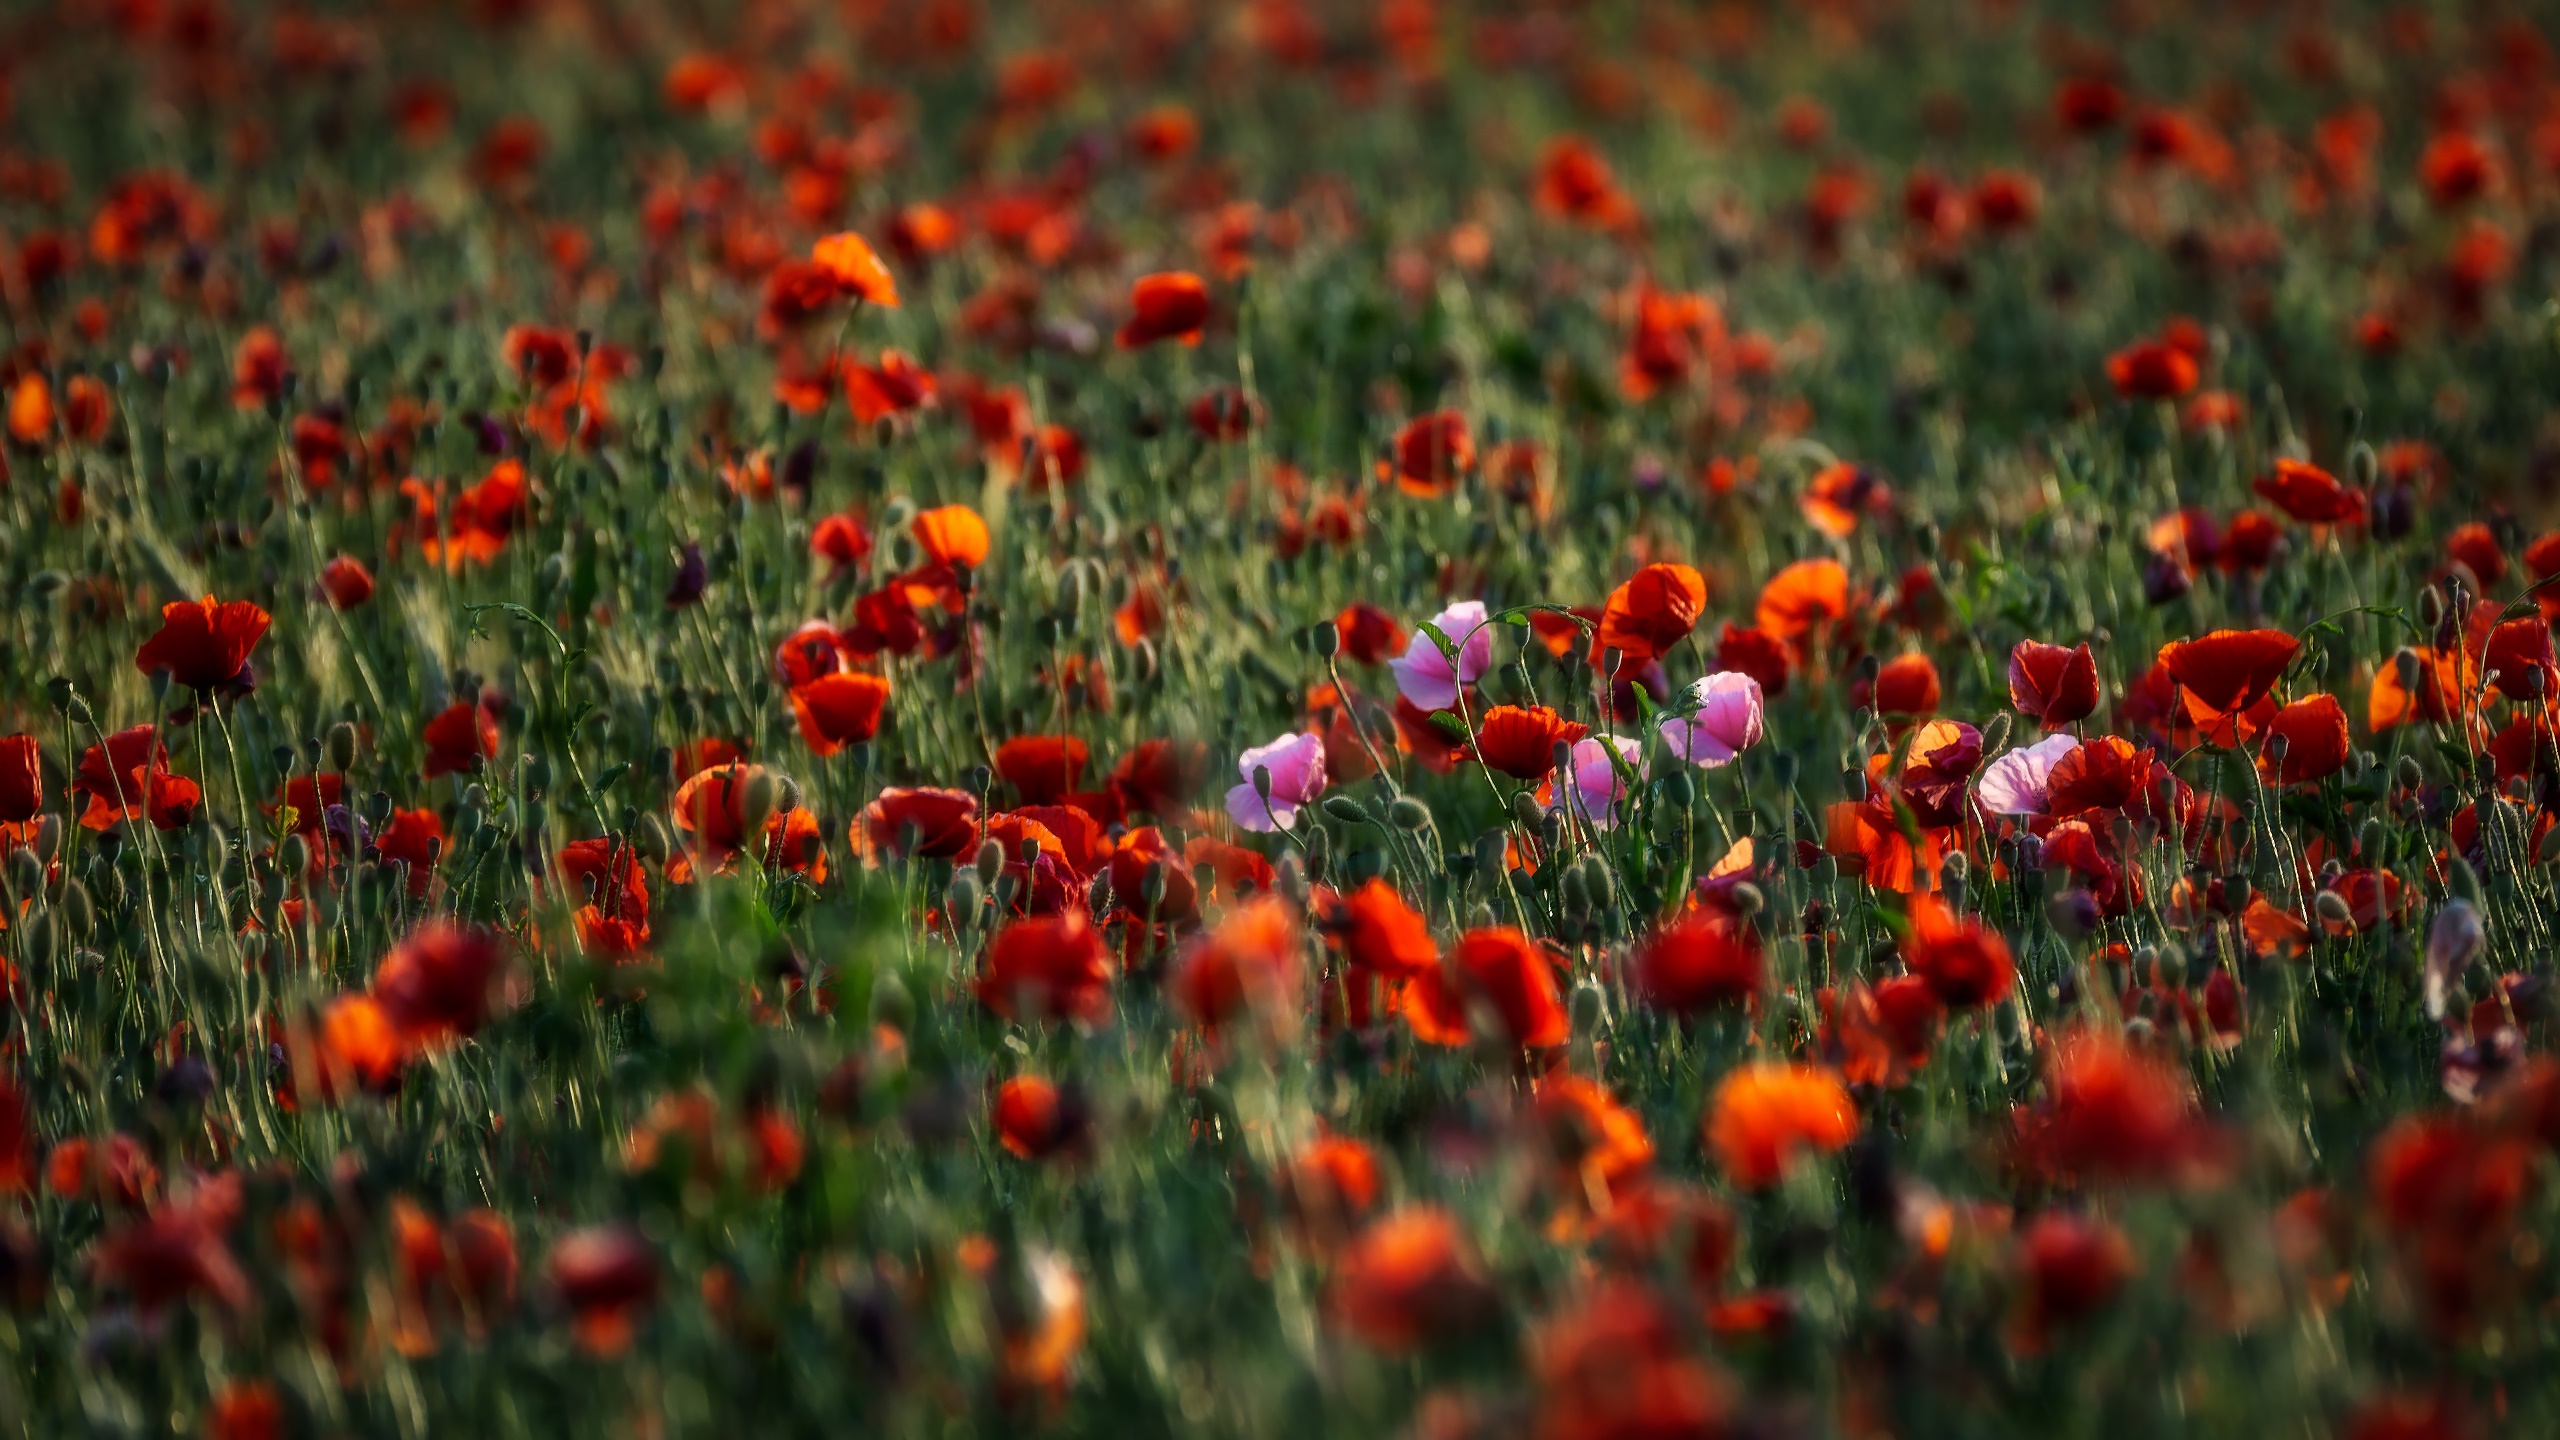 General 2560x1440 colorful plants flowers red flowers outdoors nature poppies closeup